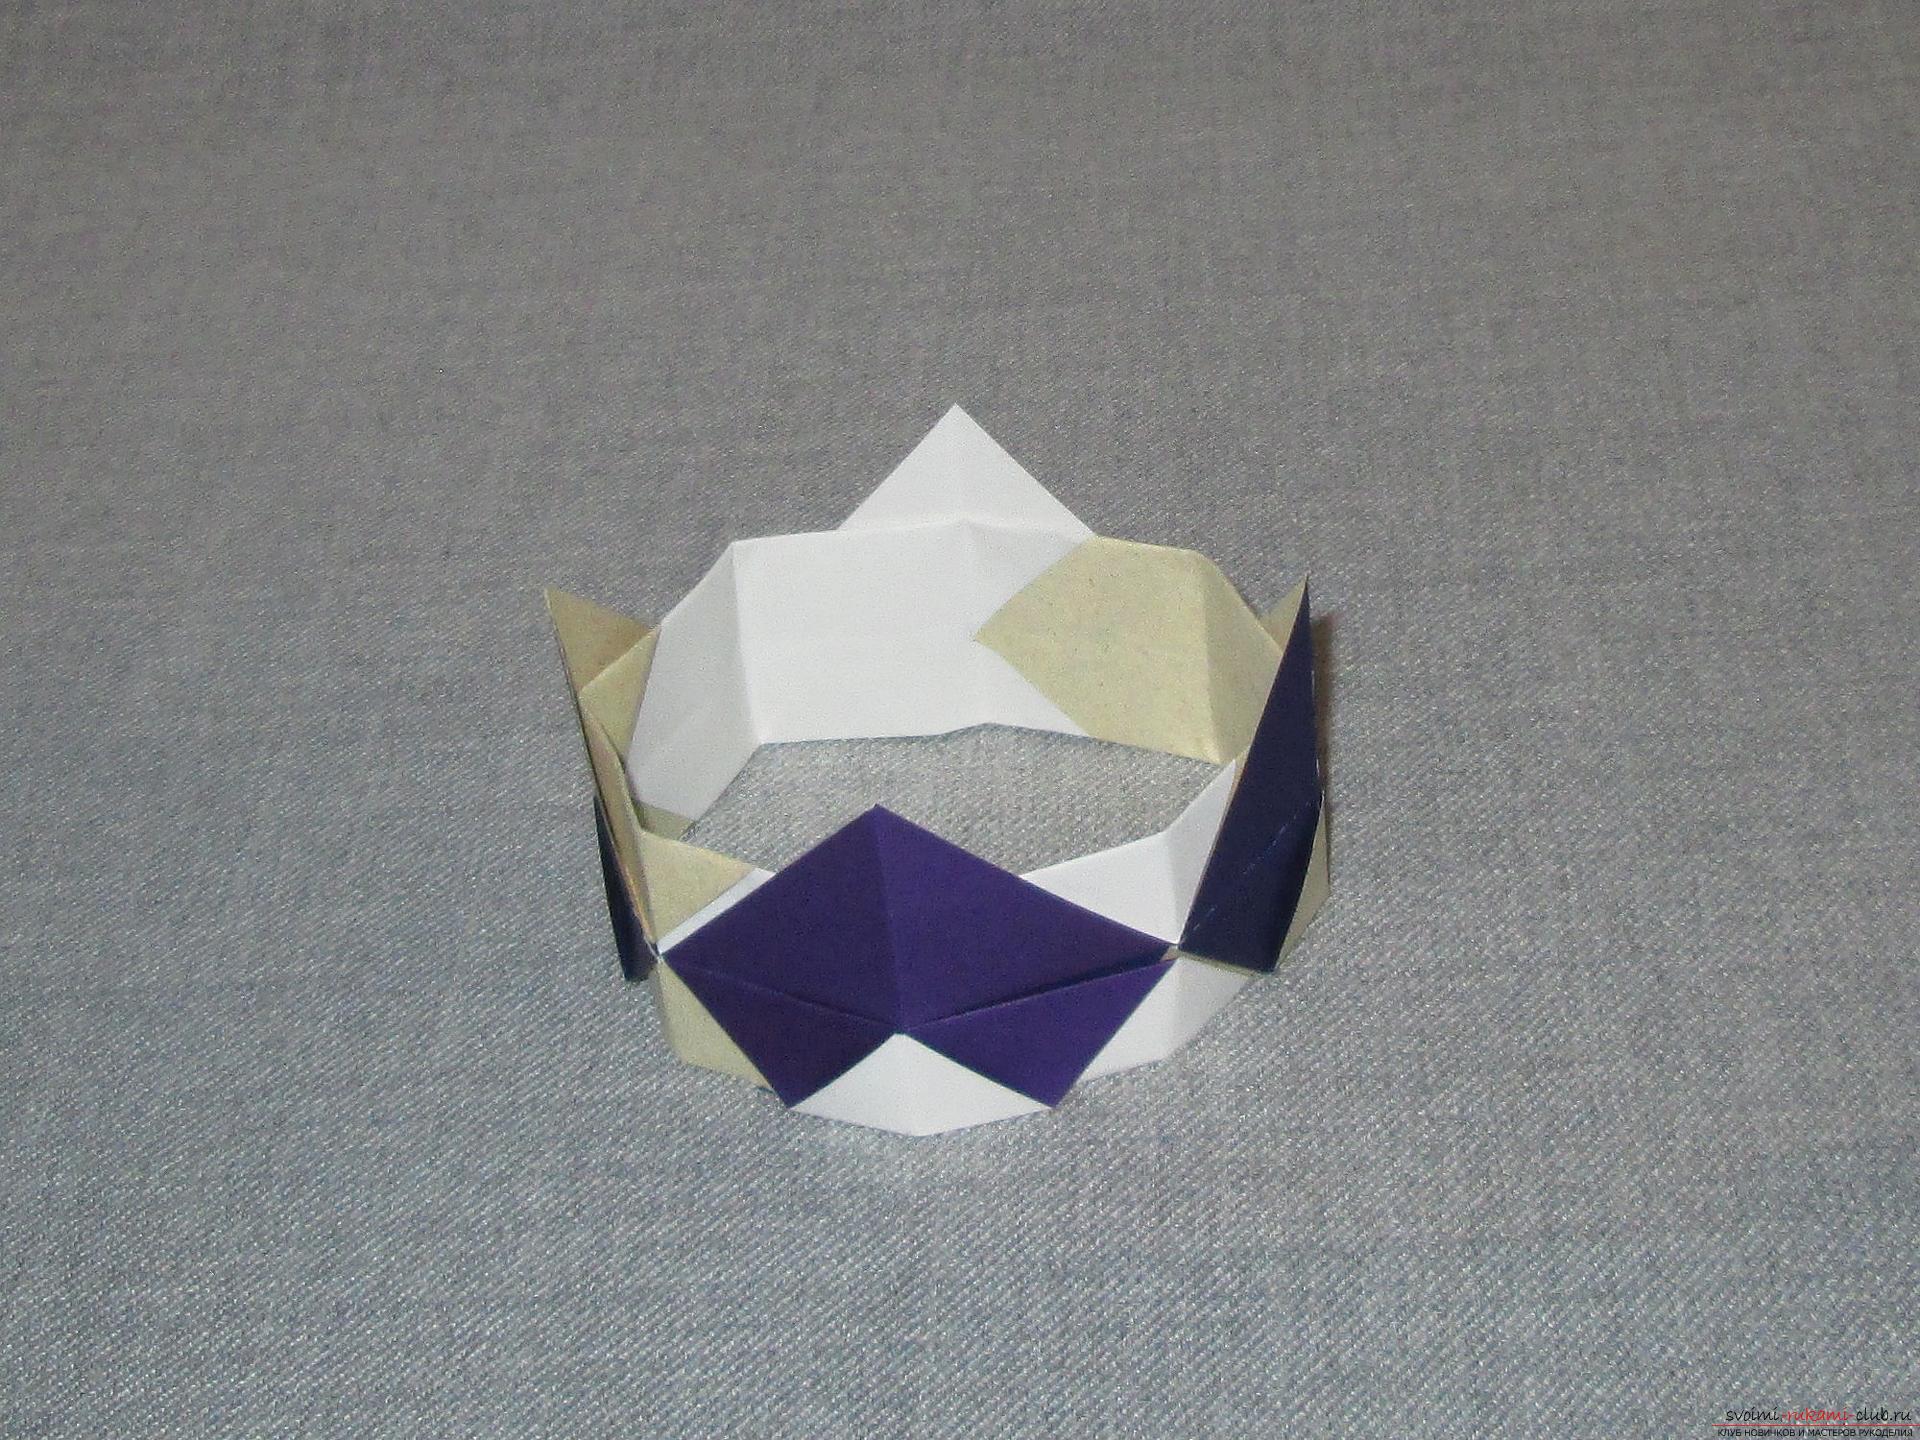 This detailed master class with photo and description will teach you how to make origami for beginners - origami-crown made of paper .. Photo # 1